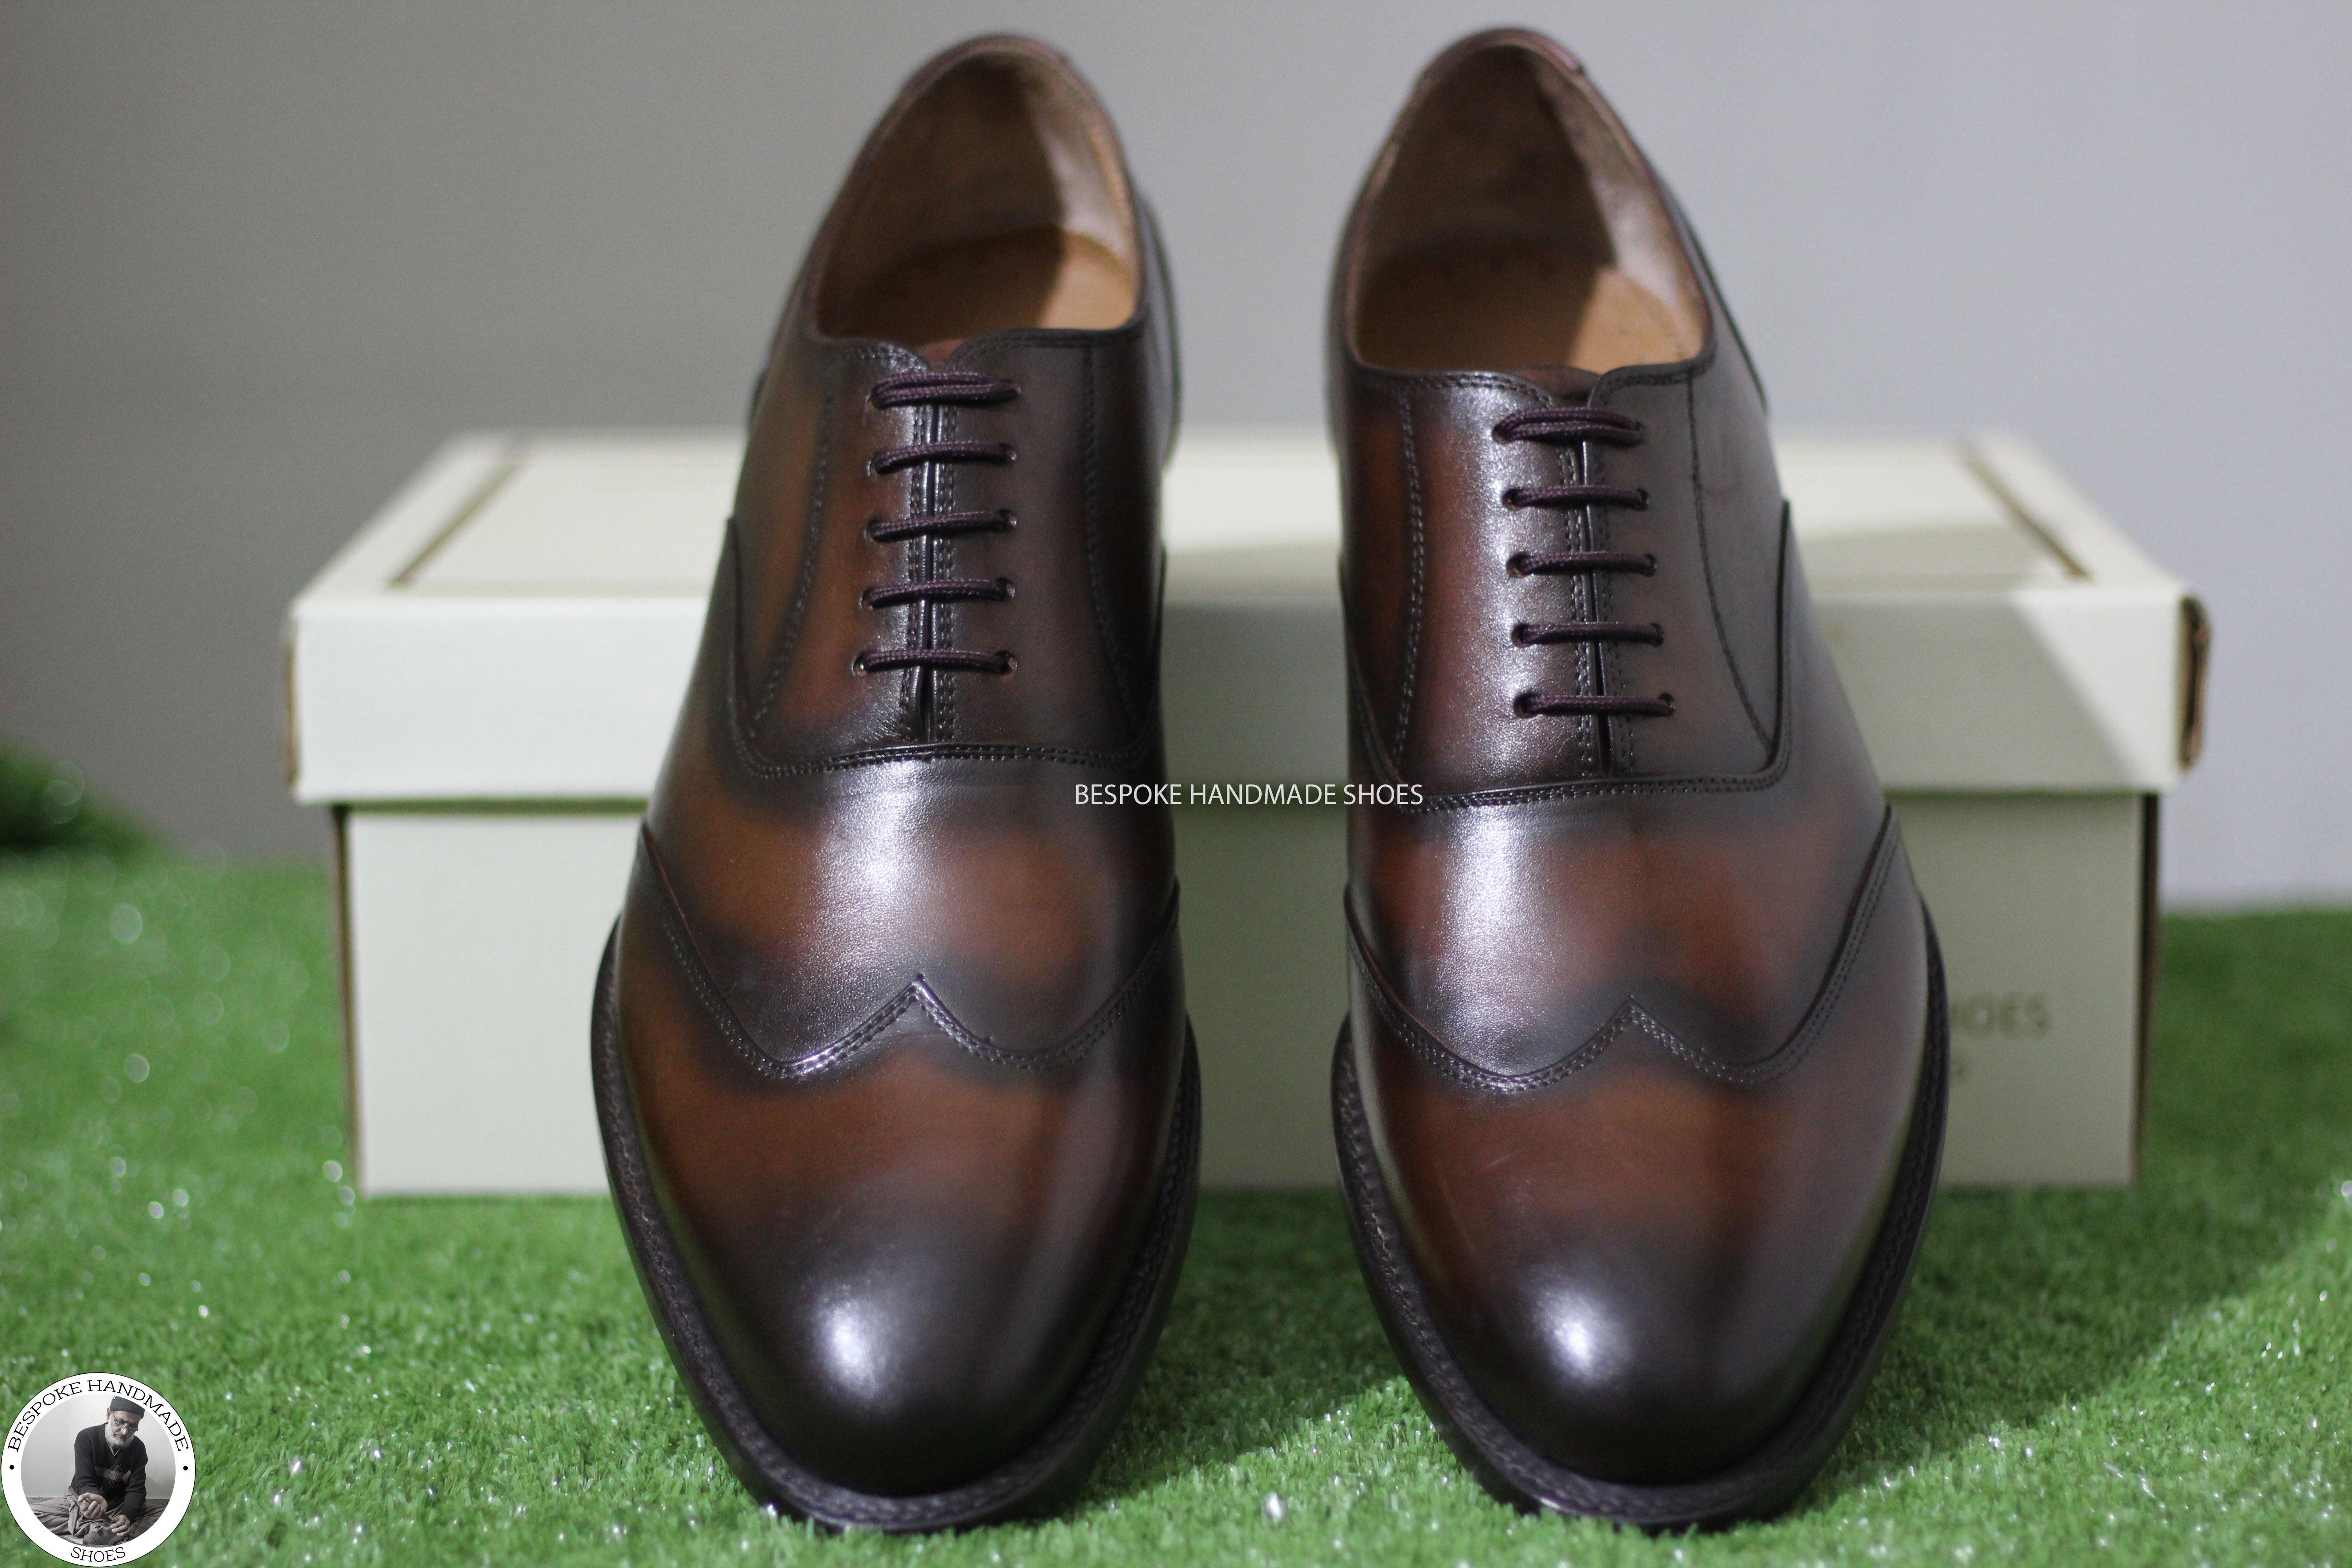 Custom Made Handmade Goodyear Welted Chocolate Brown Leather Oxford Lace up Wingtip Brogue Dress Shoes